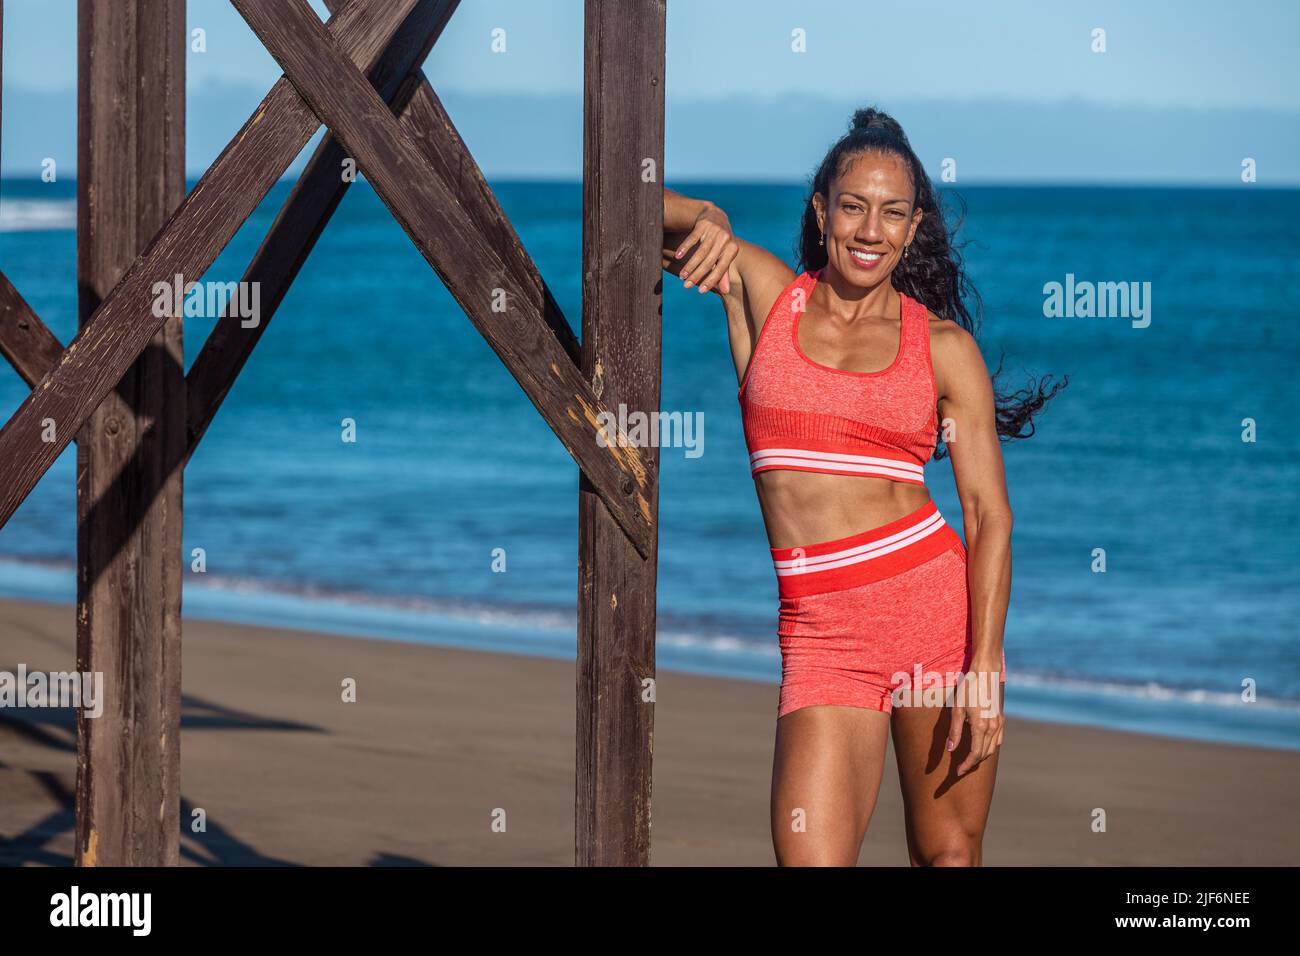 Portrait of latin female athlete in sportswear standing on beach shore during summer Stock Photo